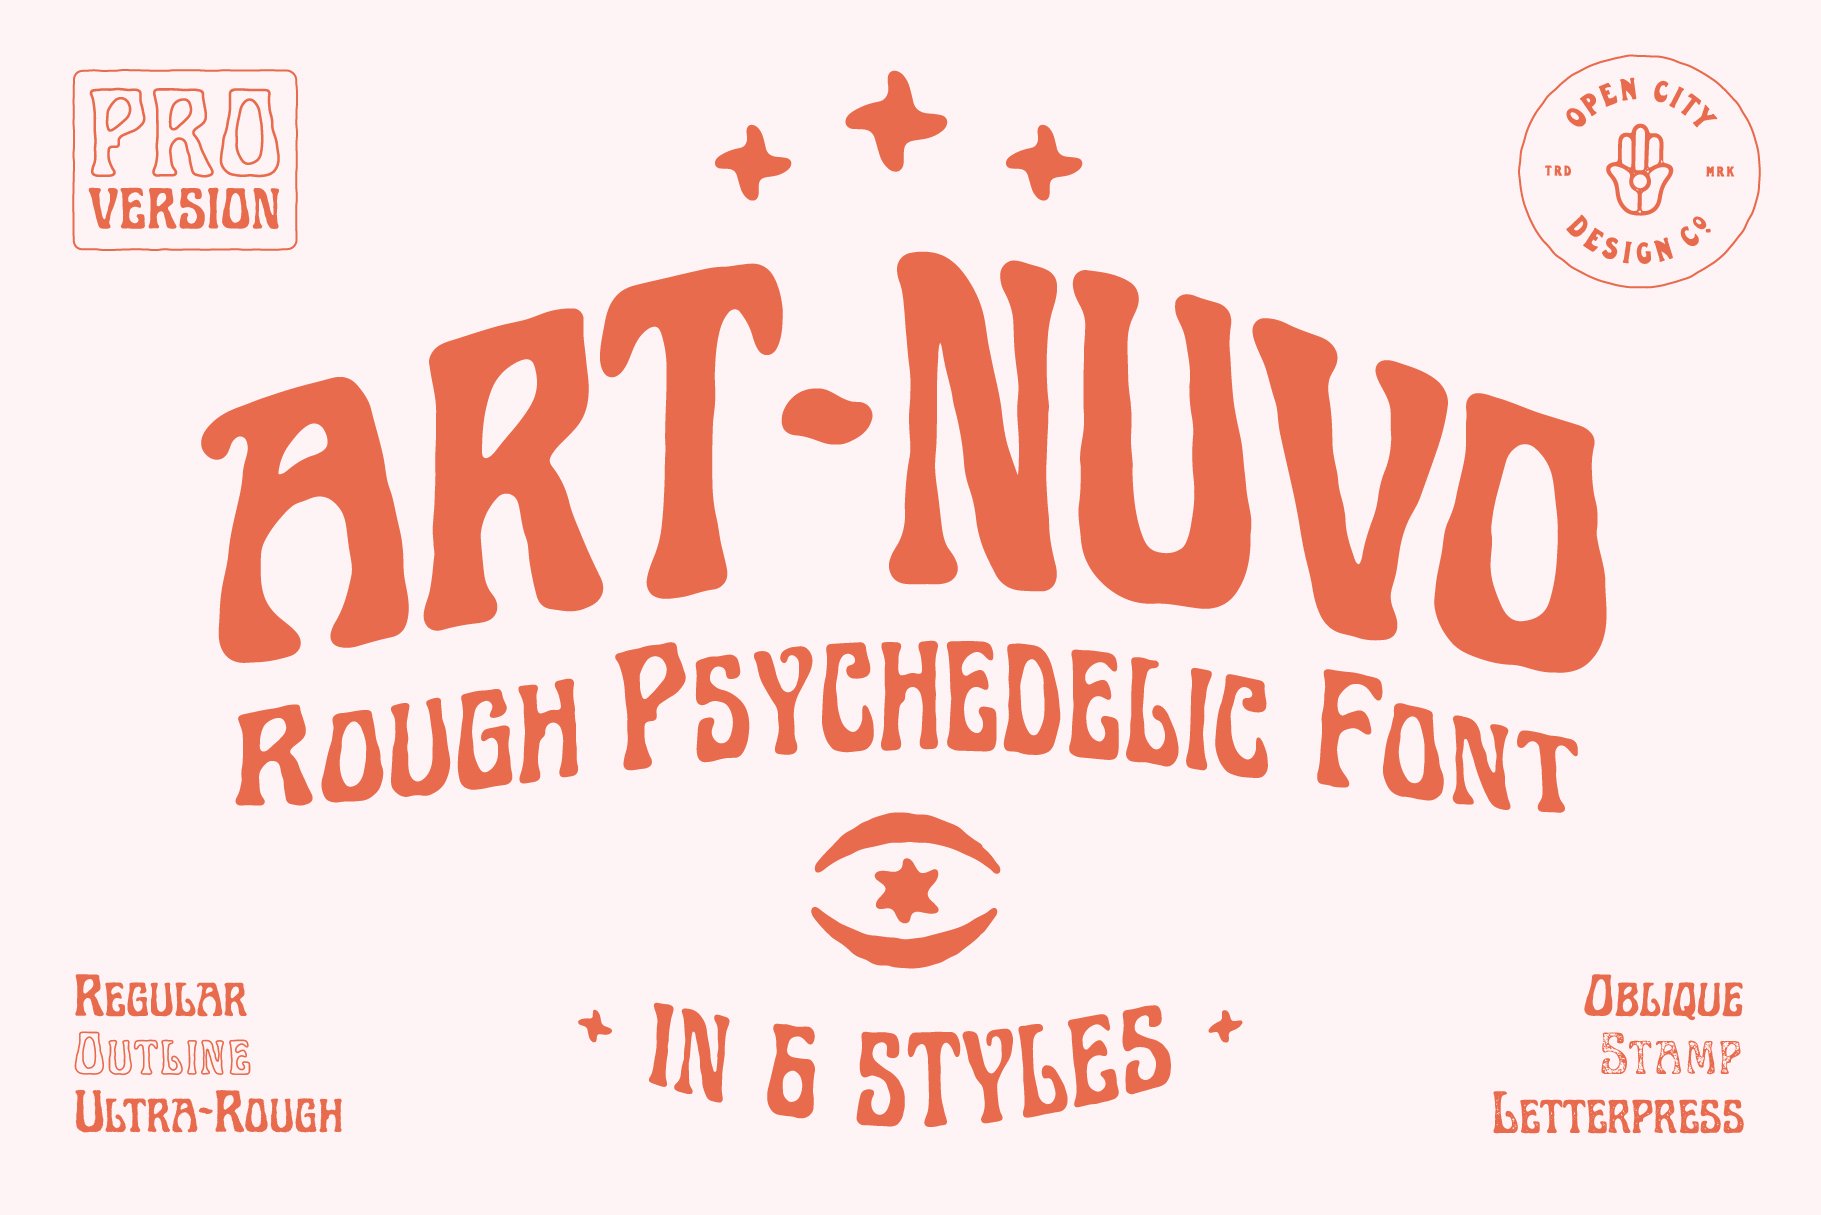 Art-Nuvo - Rough Psychedelic Font cover image.